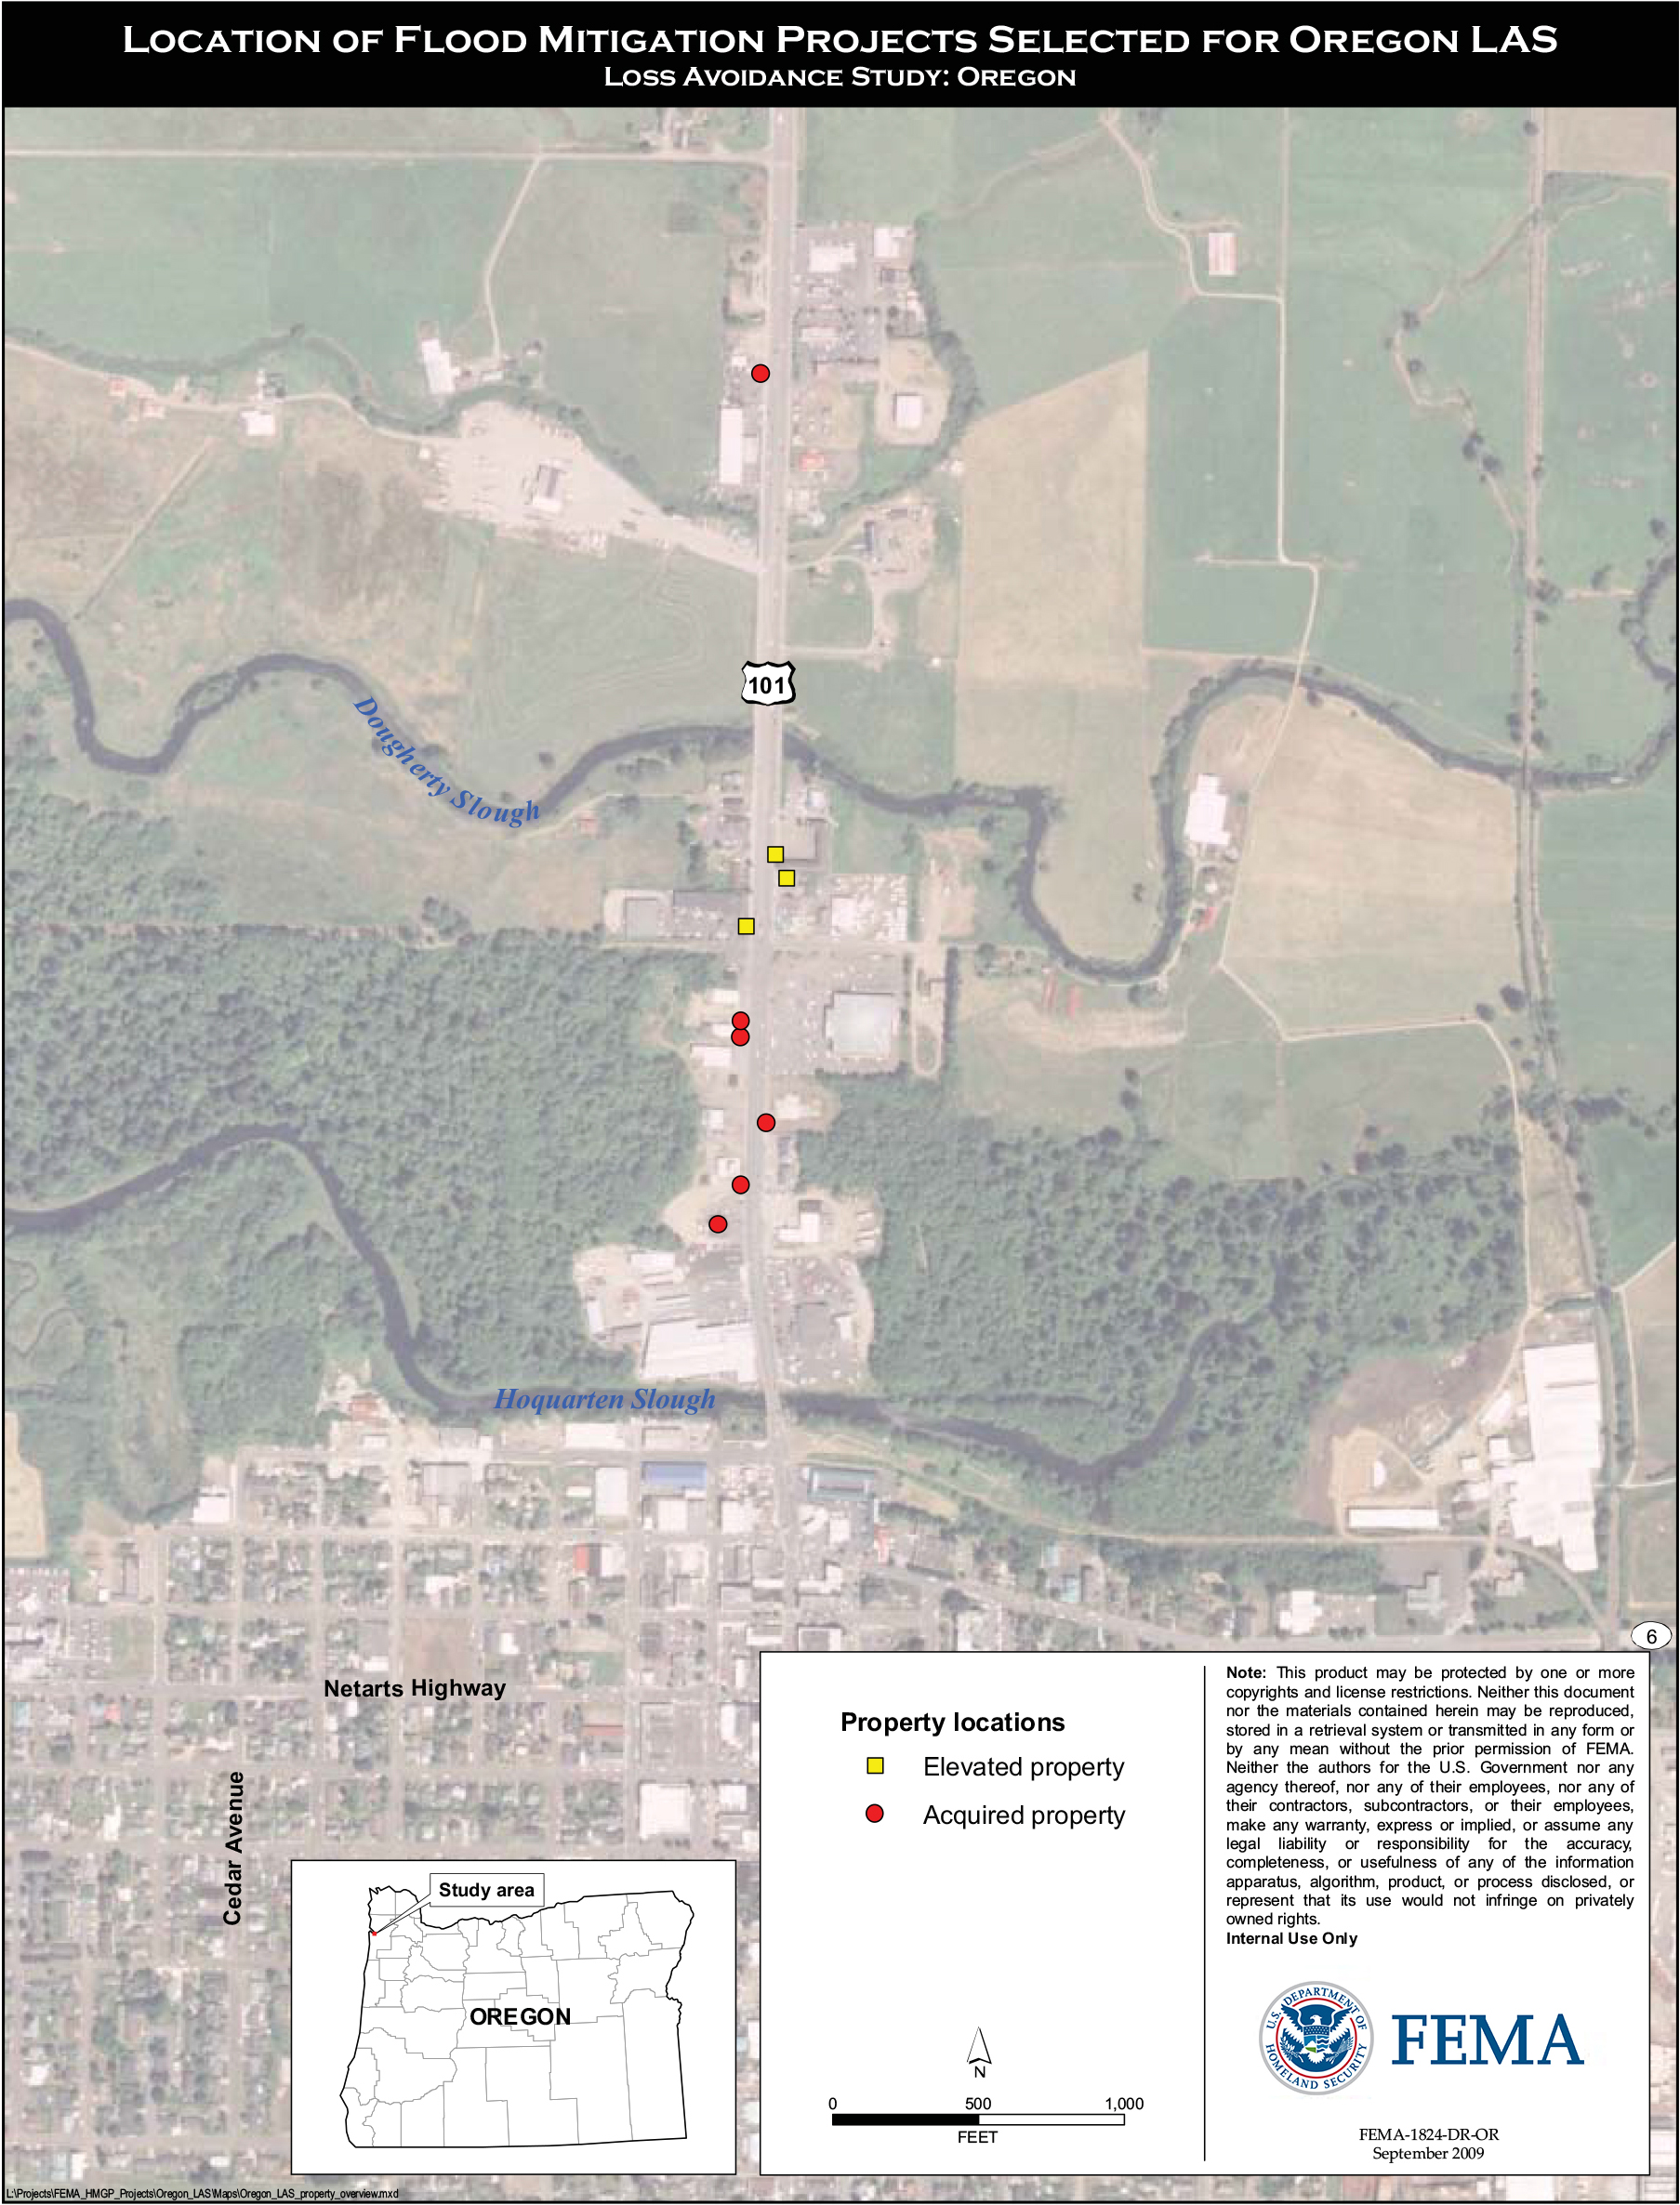 Location of Flood Mitigation Projects Selected for Oregon LAS Loss Avoidance Study: Oregon. Shown: Property locations by Elevated Properties; Acquired Properties. FEMA-1824-DR-OR, September 2009.